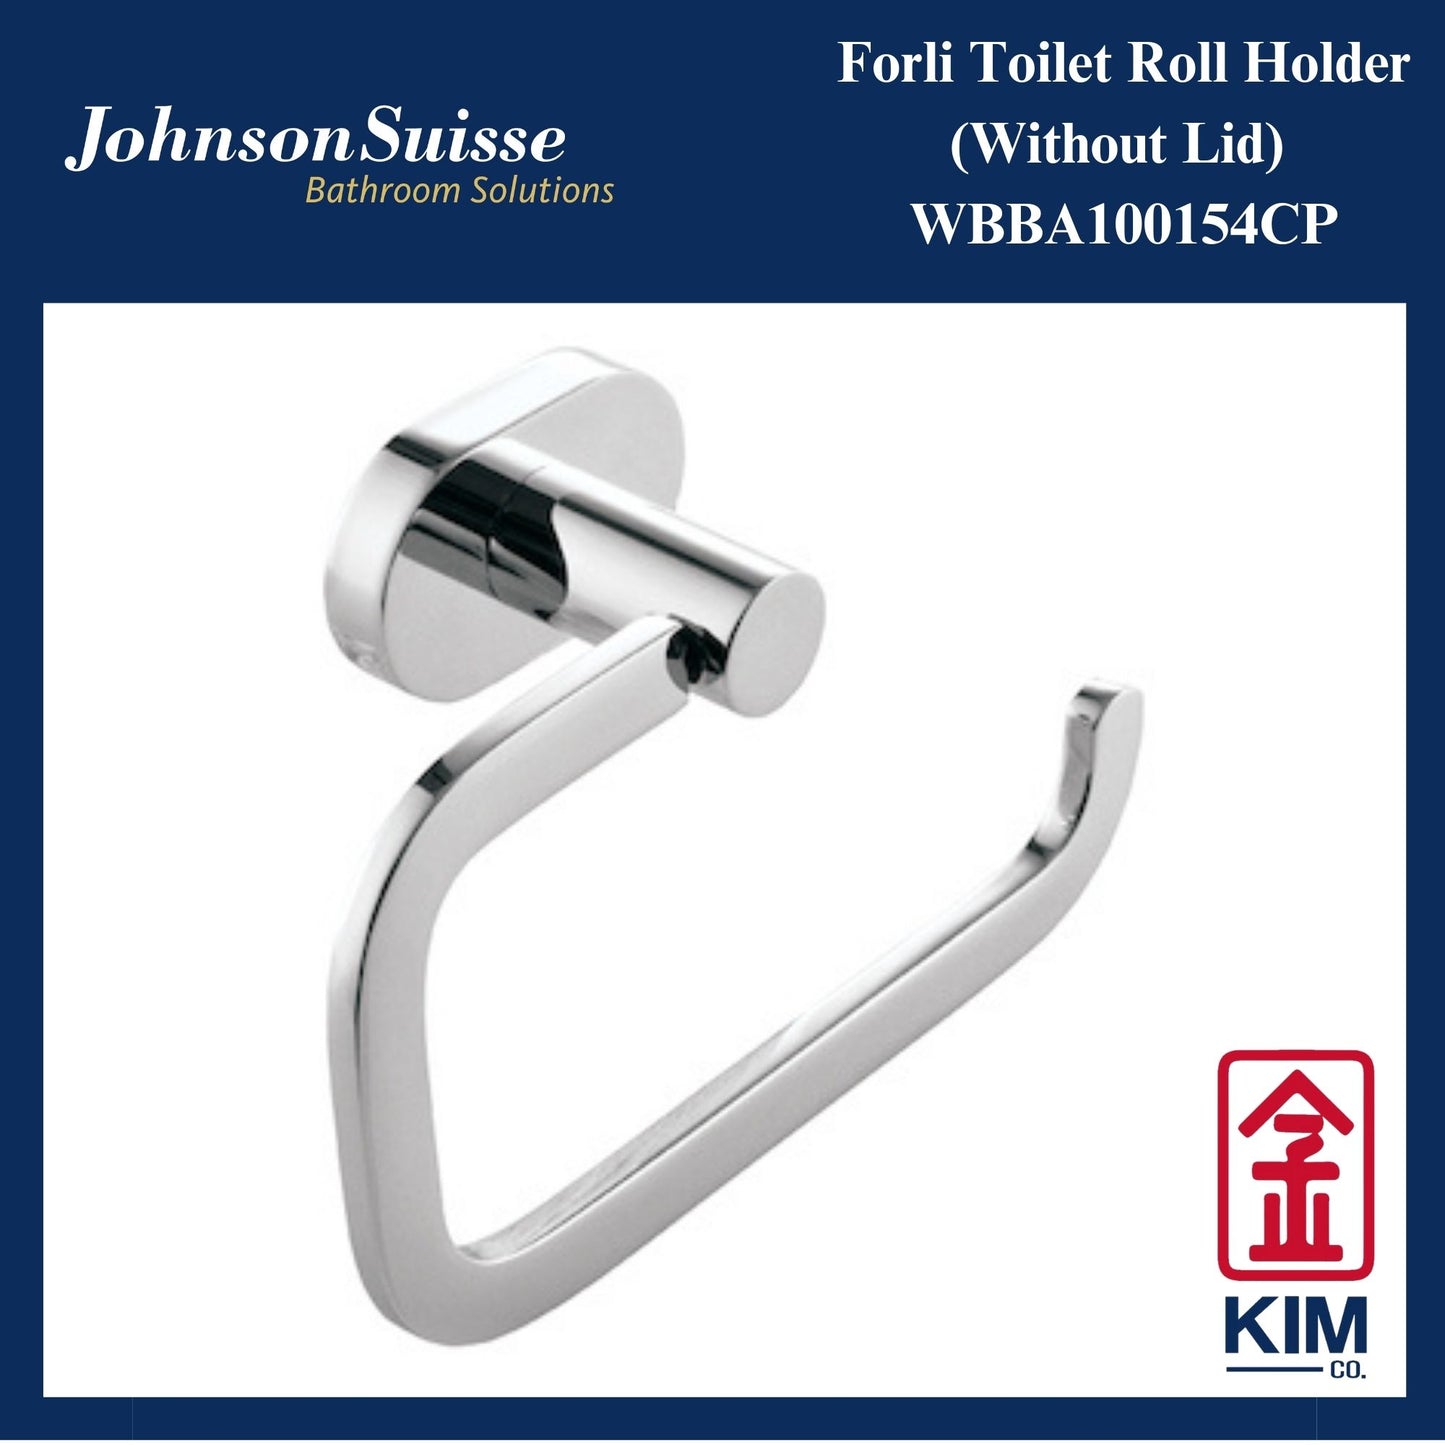 Johnson Suisse Forli Toilet Roll Holder Without Lid (WBBA100154CP)